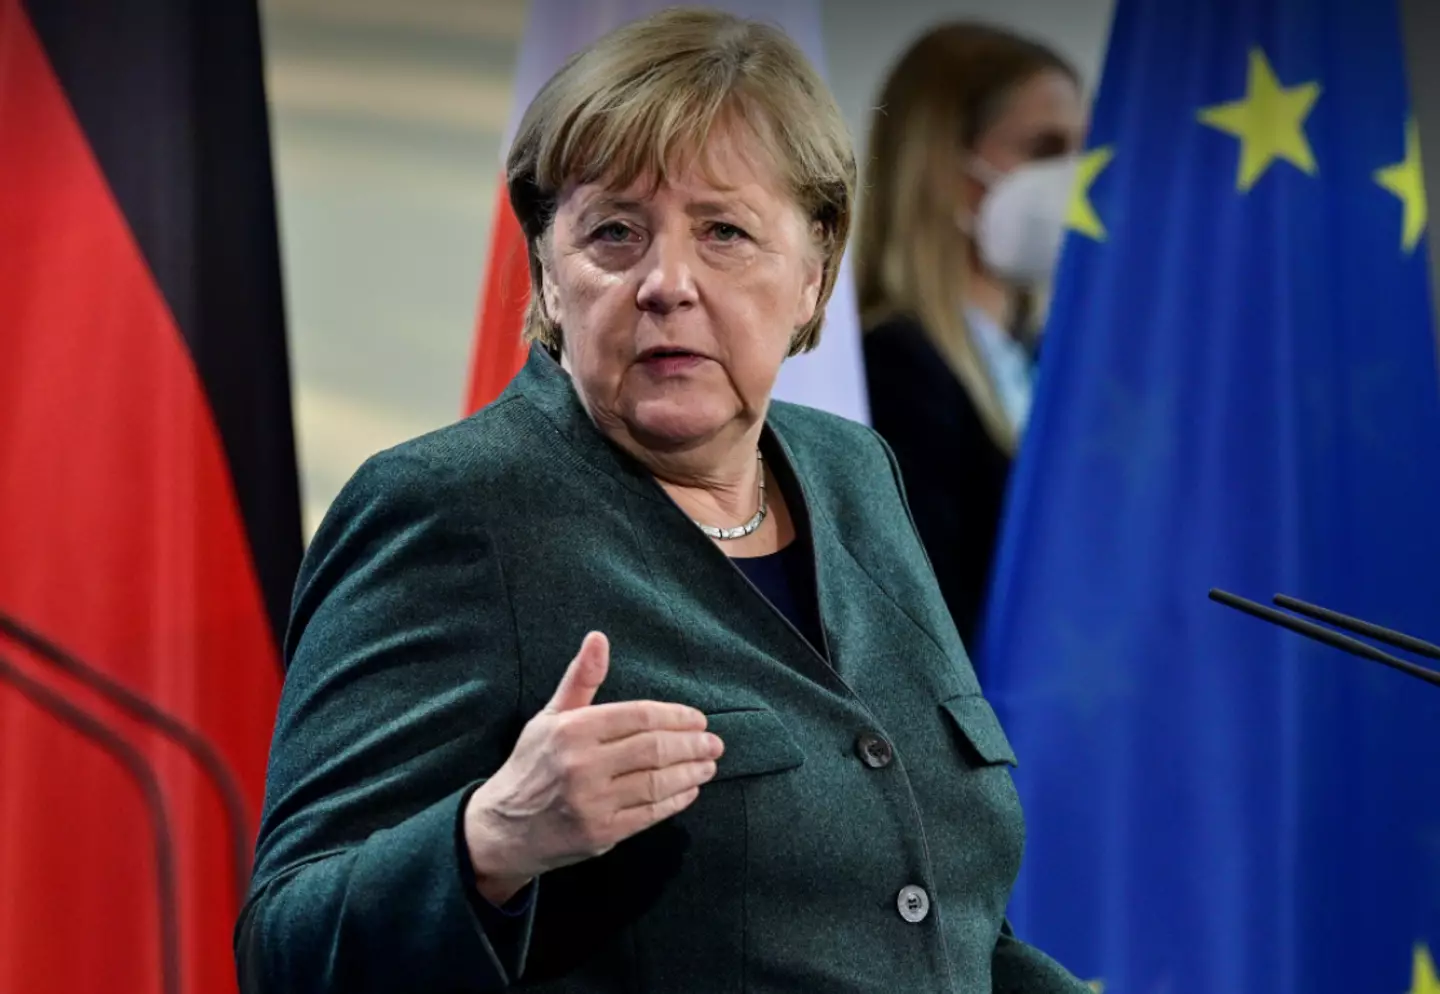 Merkel has announced a lockdown for unvaccinated German citizens.